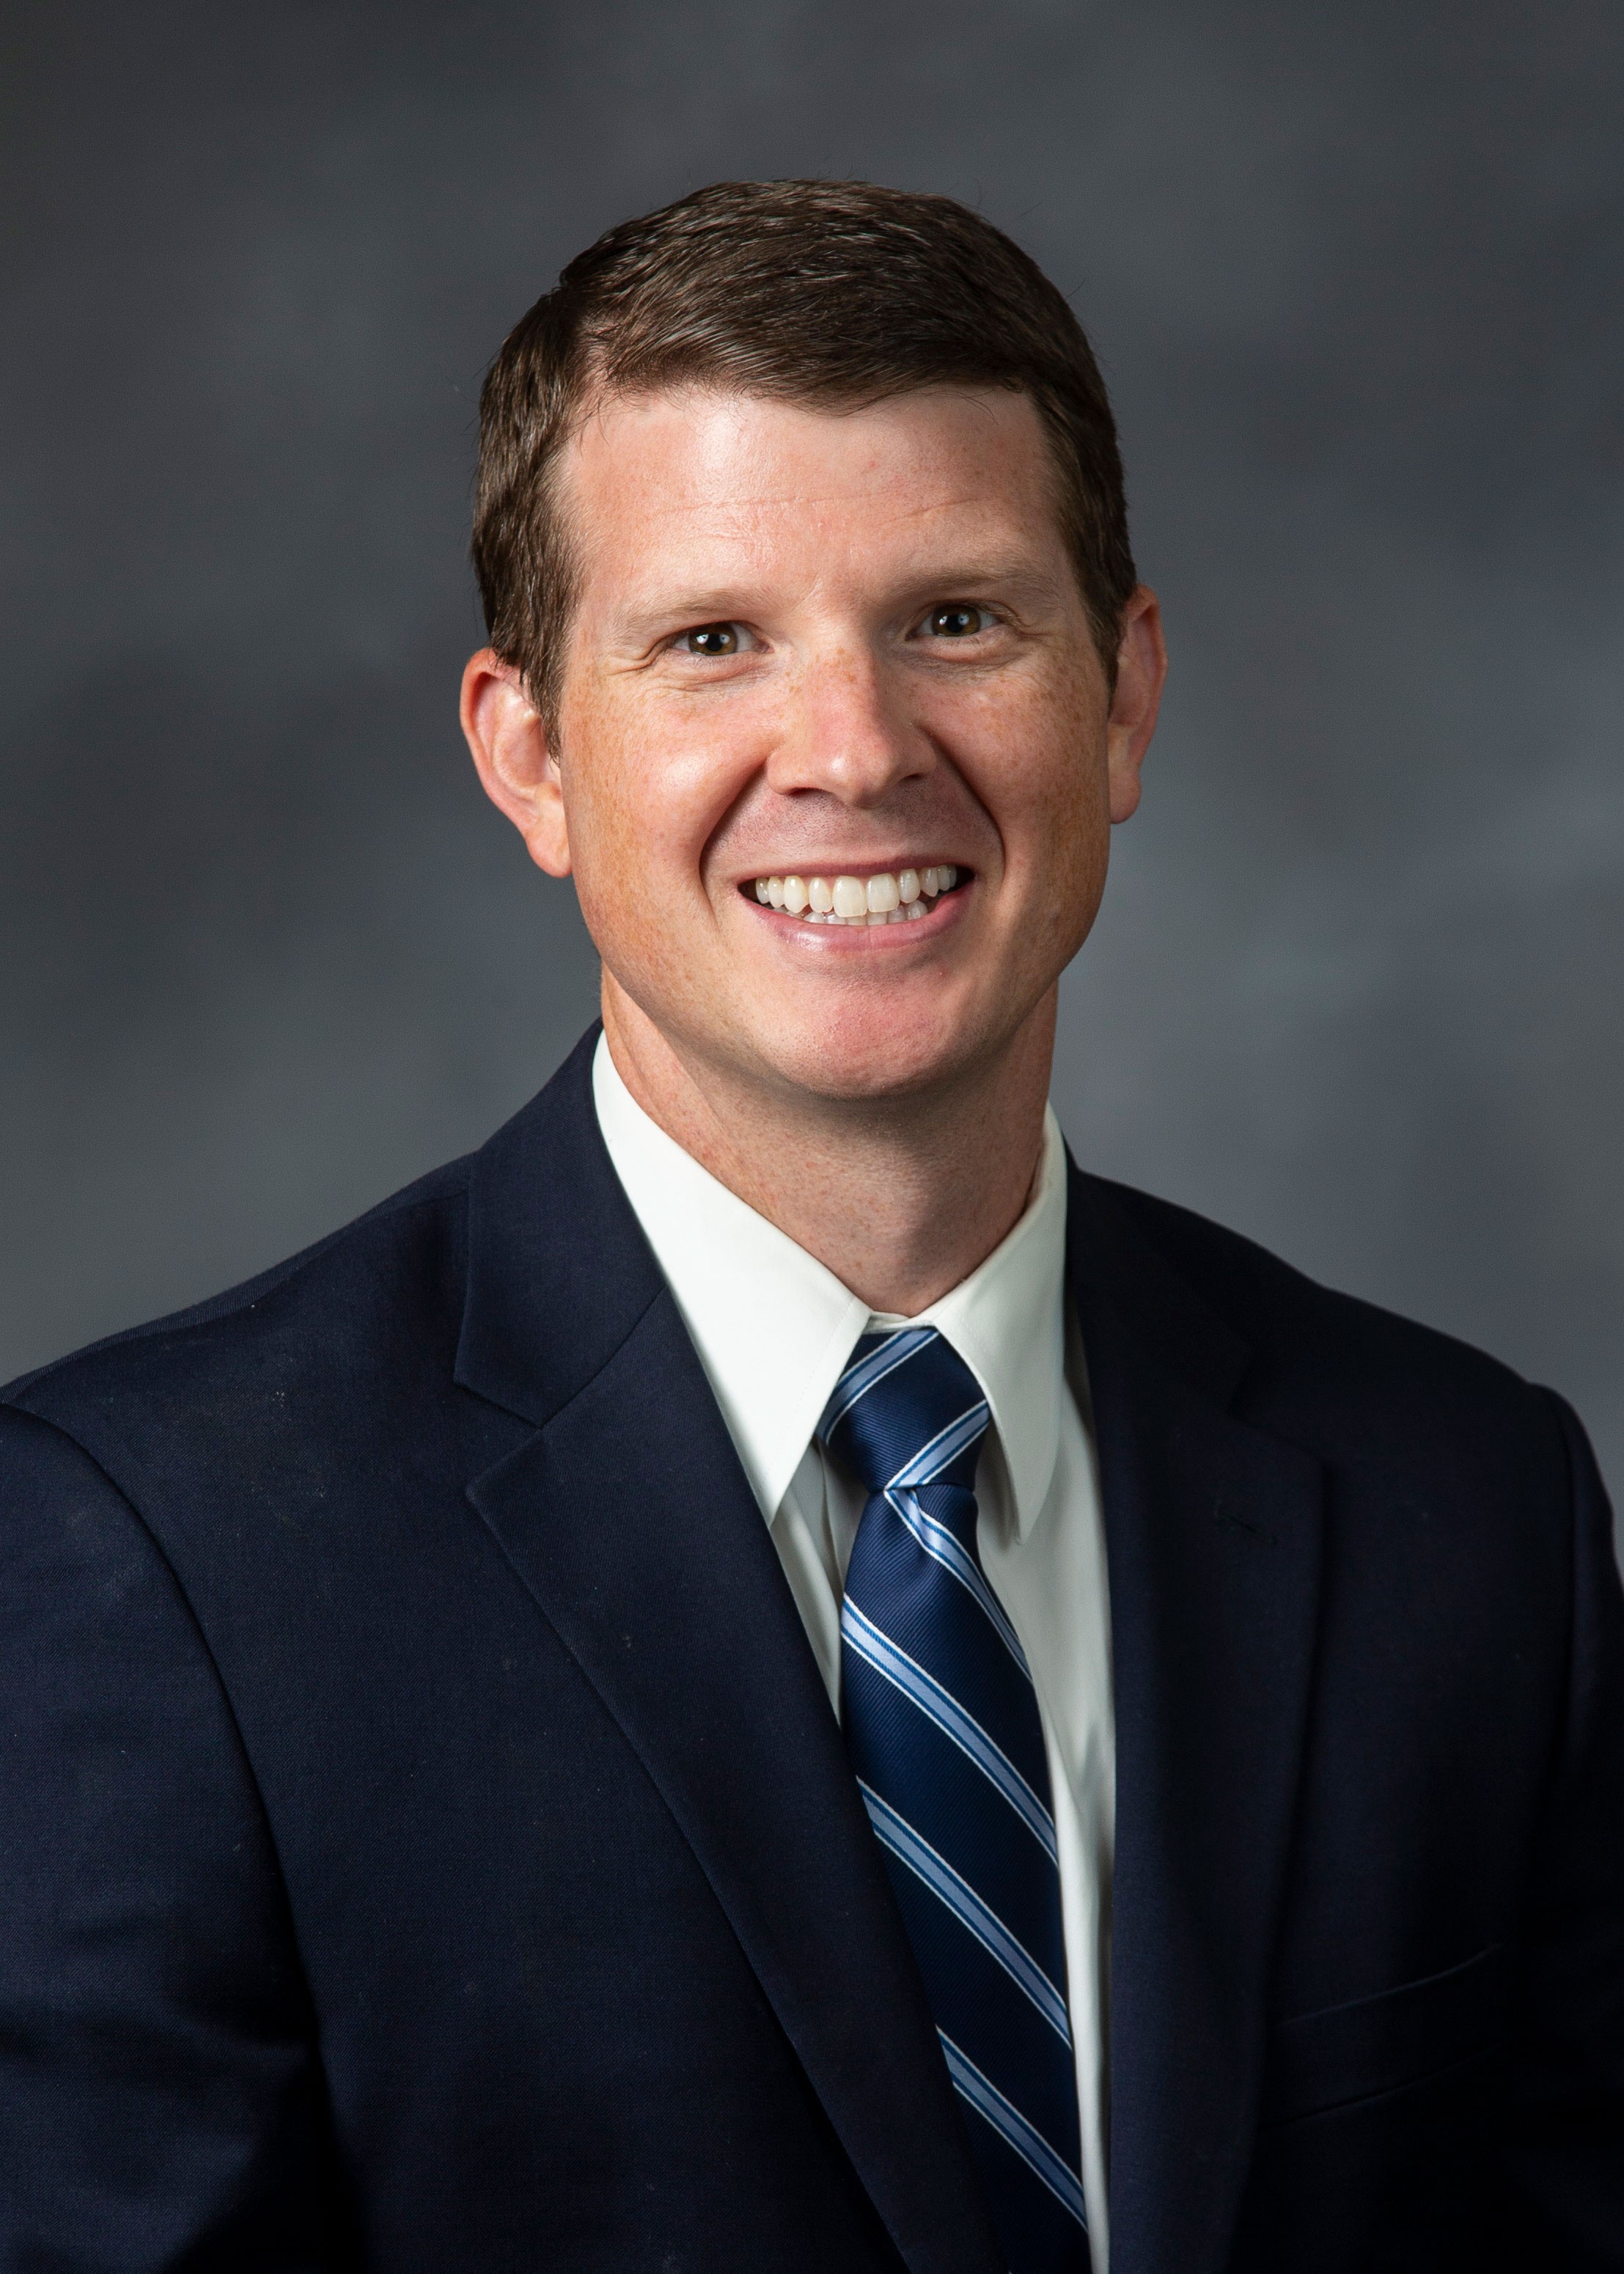 BYU Marriott Welcomes New Faculty in 2019 - Article - News - BYU ...